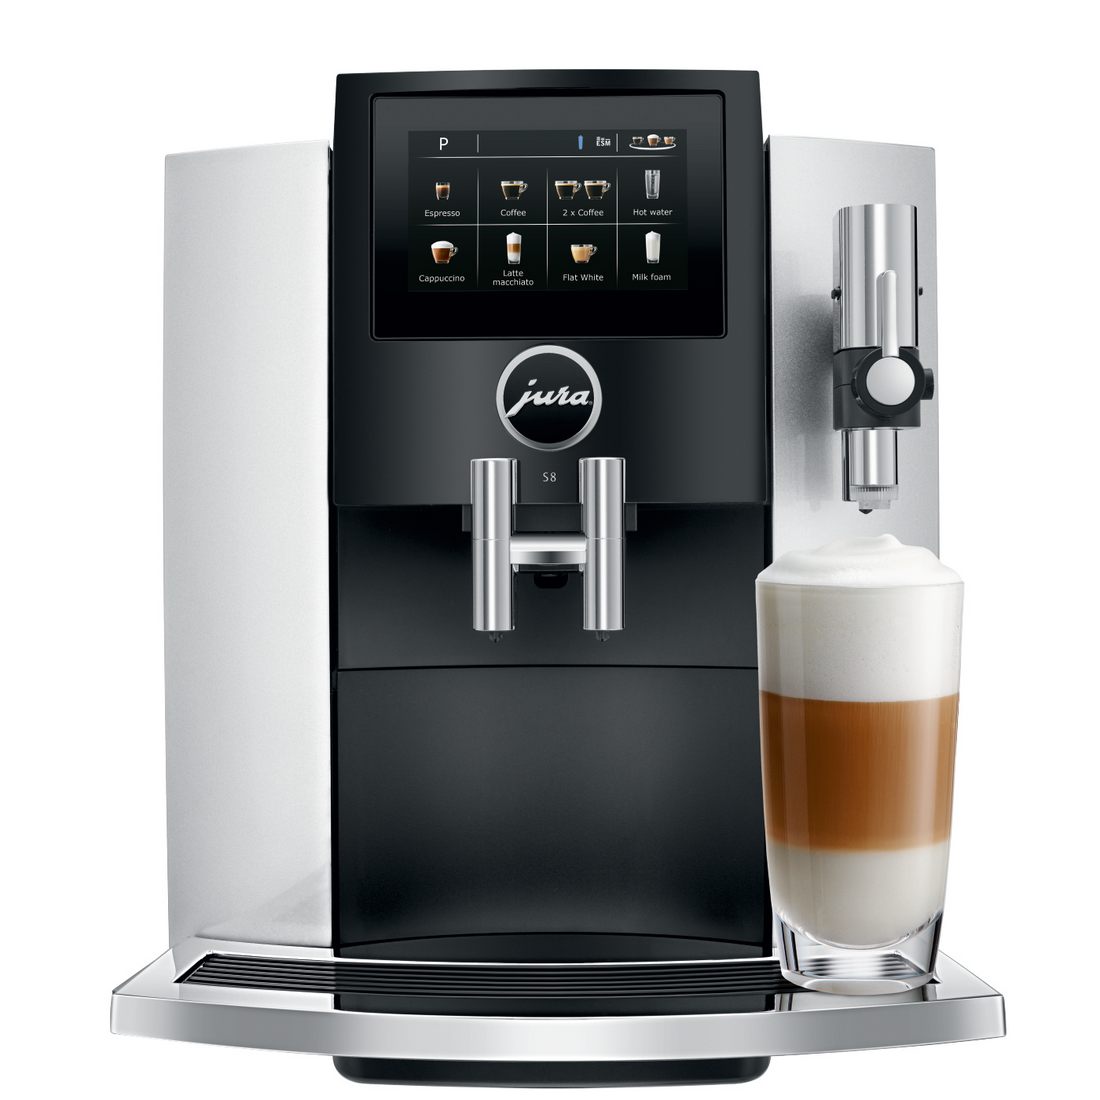 West Bend The Cocoa Latte Hot Drink Maker Review